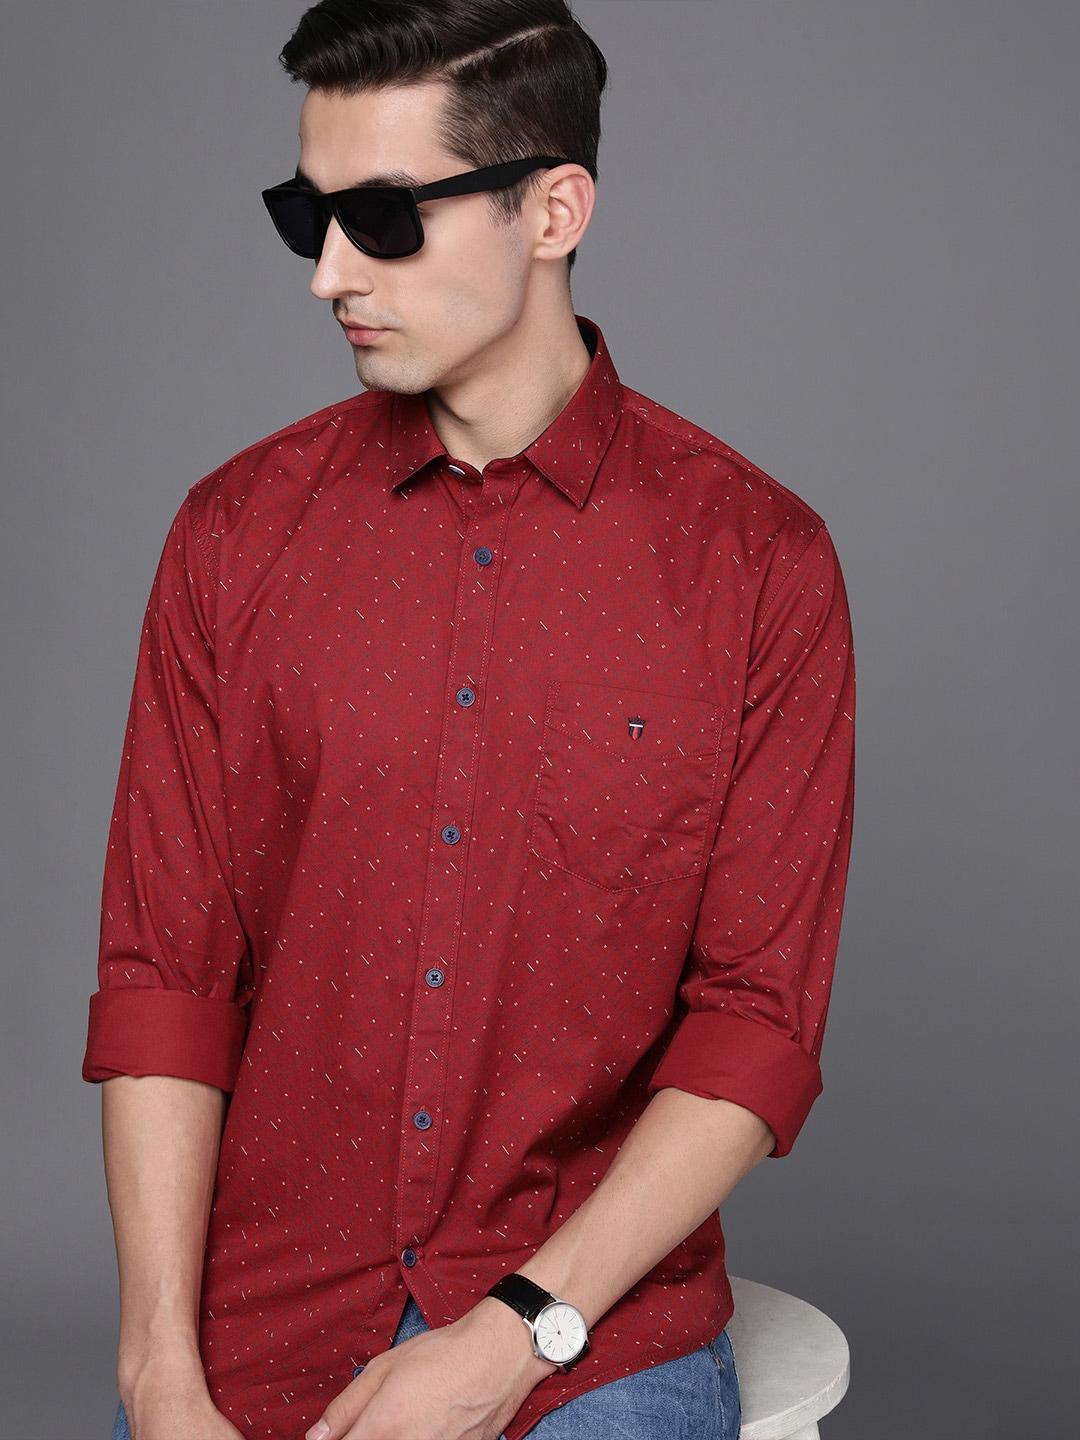 louis philippe sport men red slim fit geometric printed pure cotton casual shirt